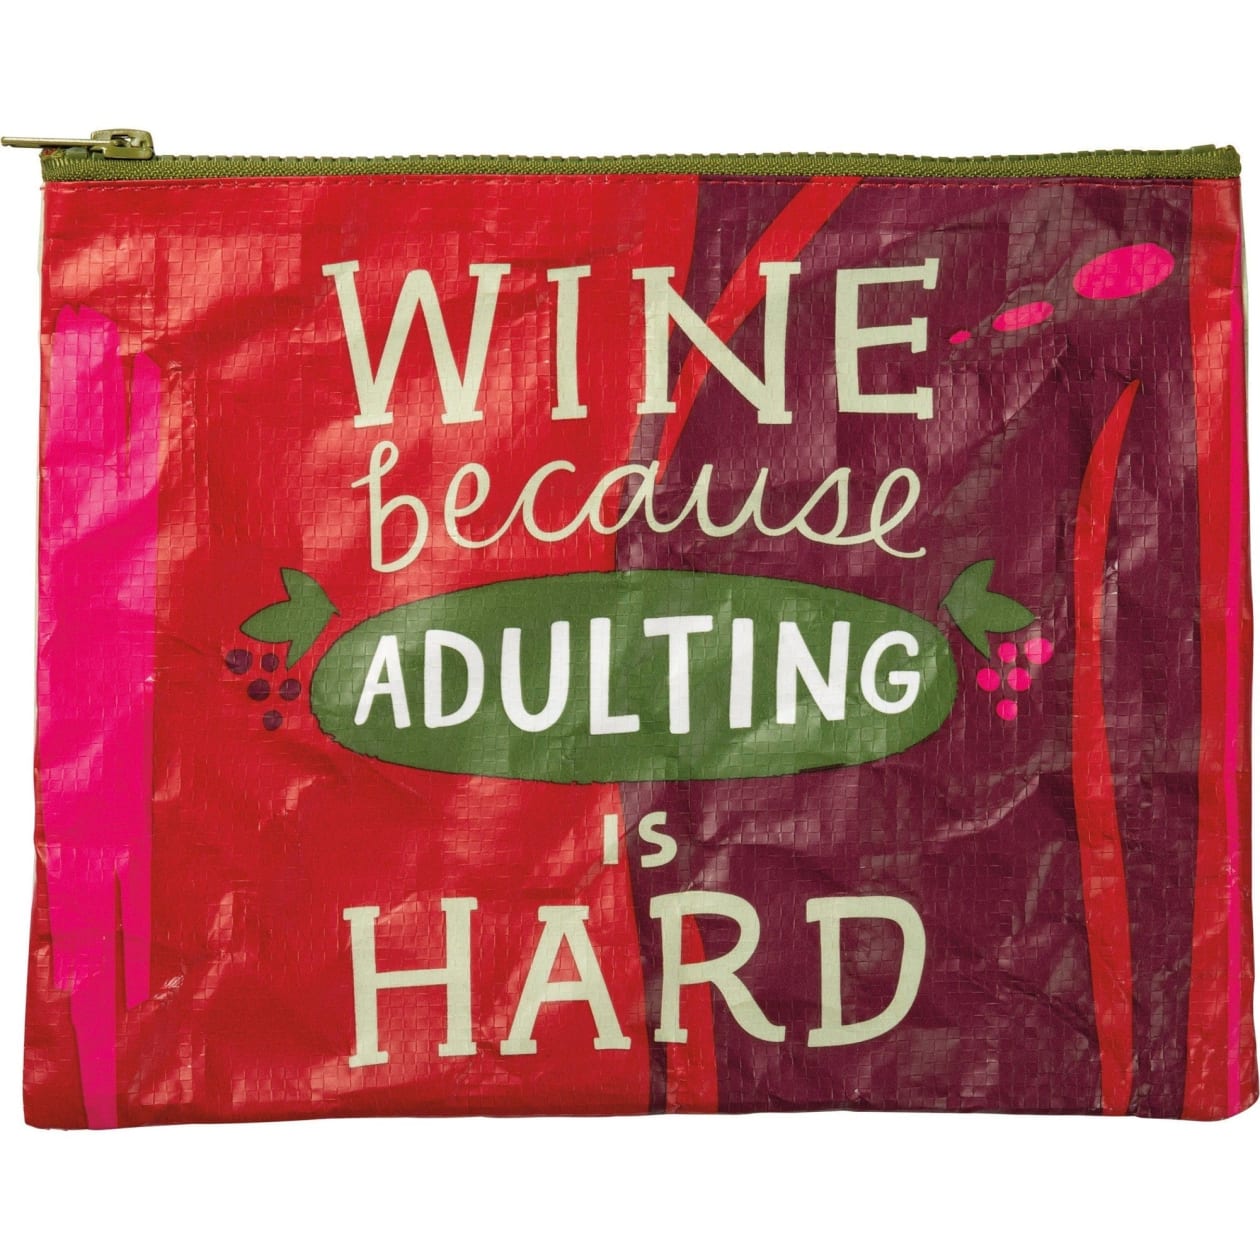 Wine Because Adulting Is Hard Zipper Pouch 9.5" x 7"